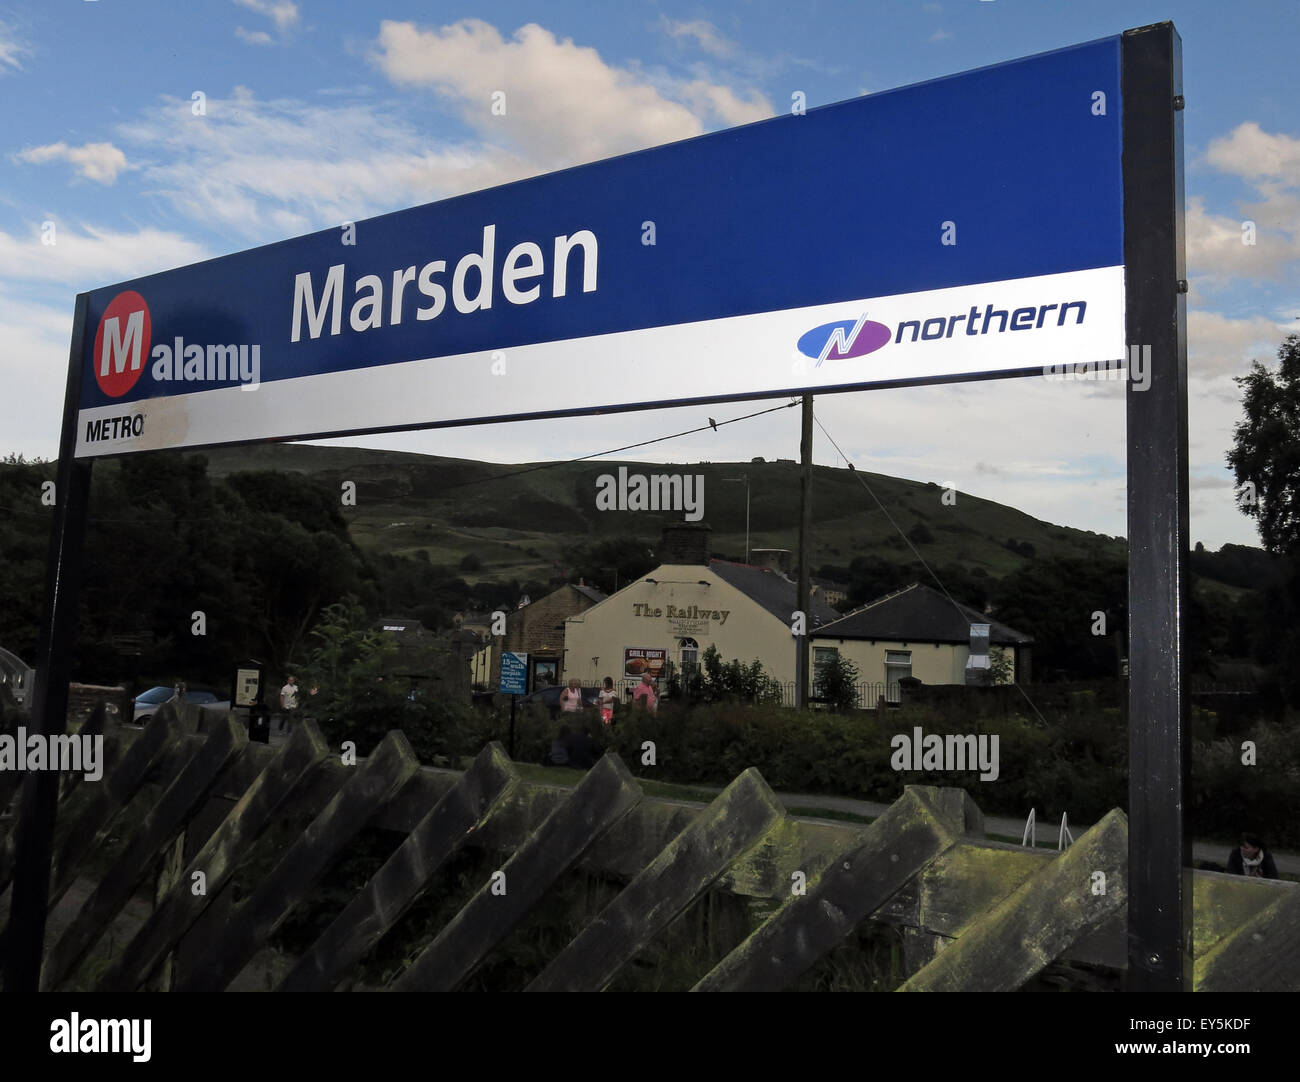 Marsden railway station sign,maintained by Northern rail, West Yorkshire Metro, England, UK Stock Photo